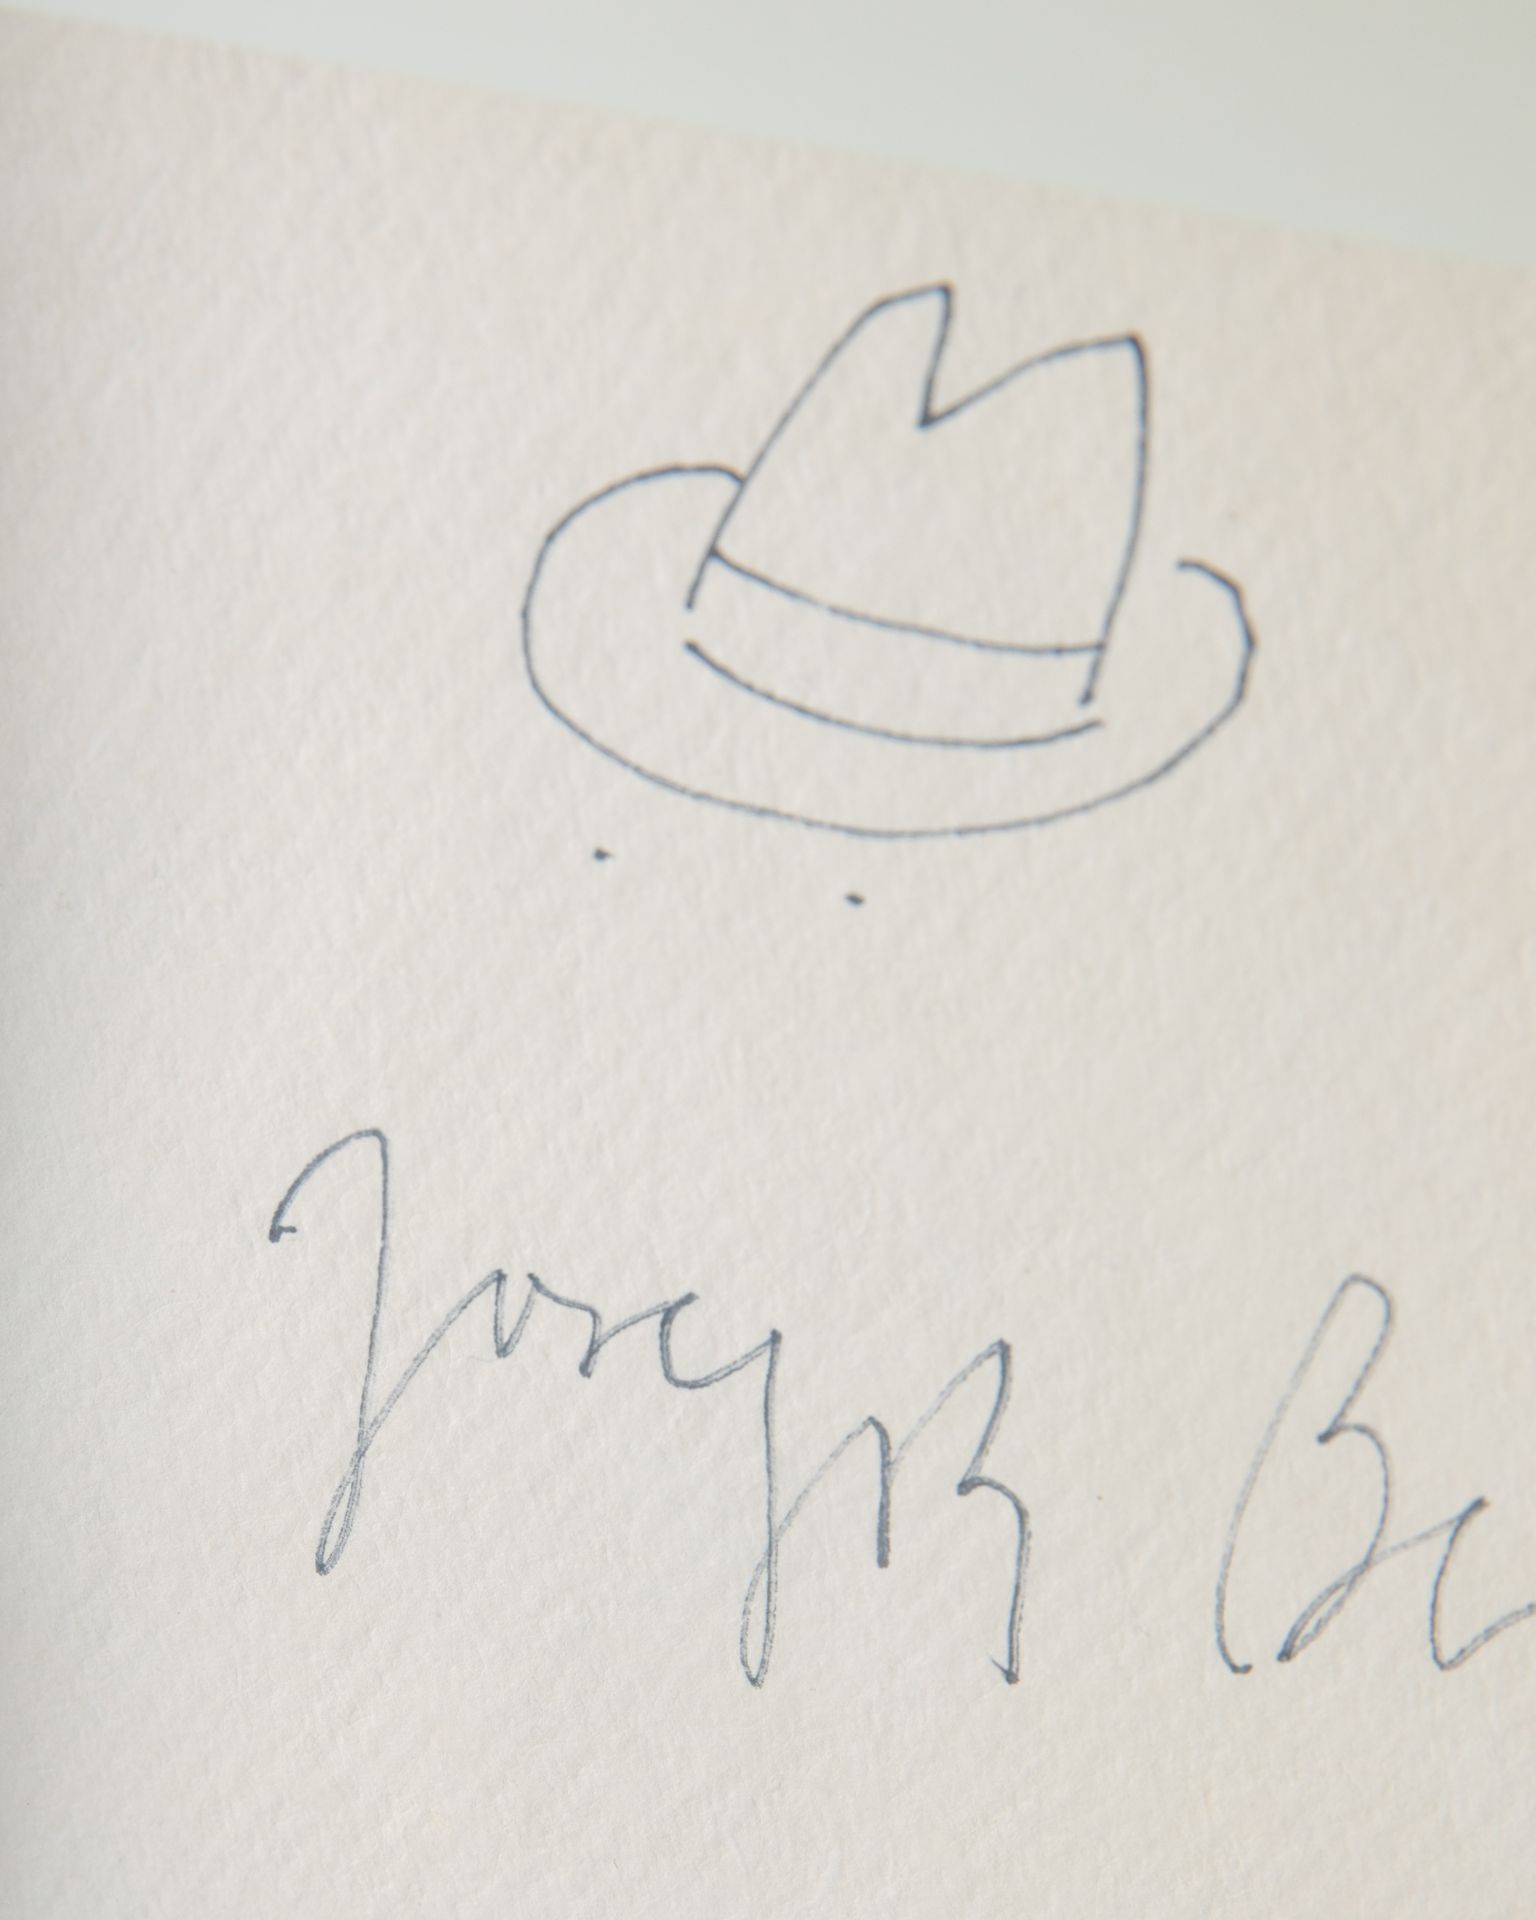 Joseph Beuys*, Drawing, hat with signature, 1979 - Image 3 of 3